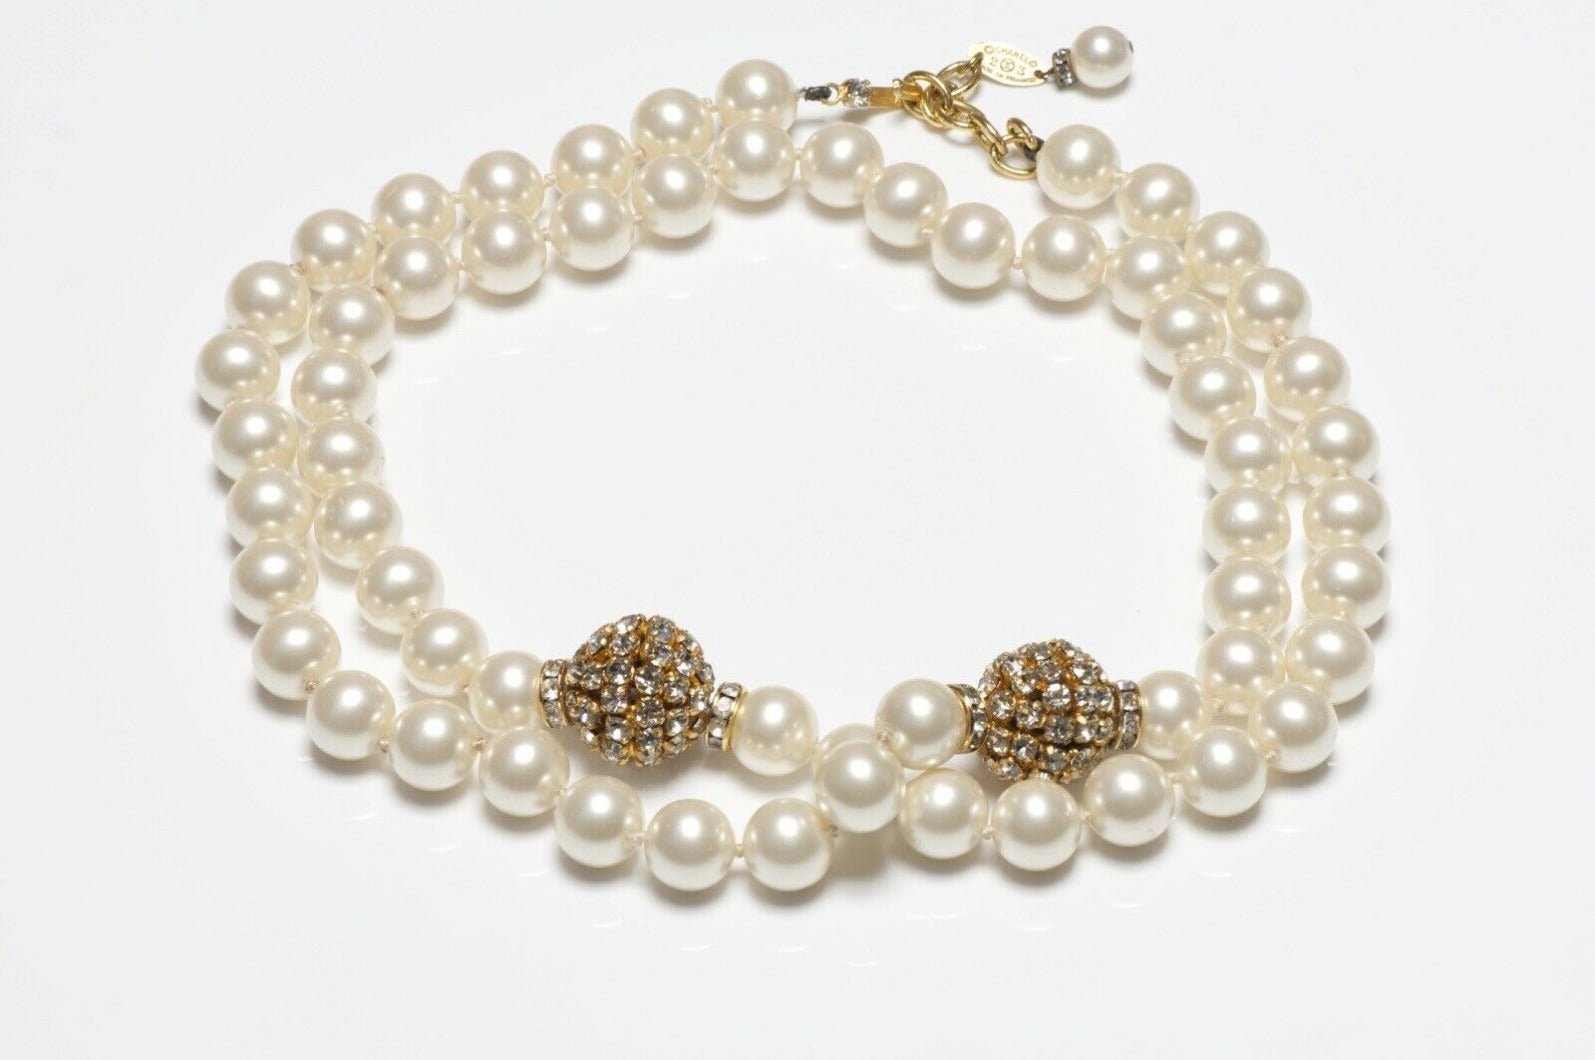 CHANEL Paris 1980’s Crystal Pearl Strand Necklace